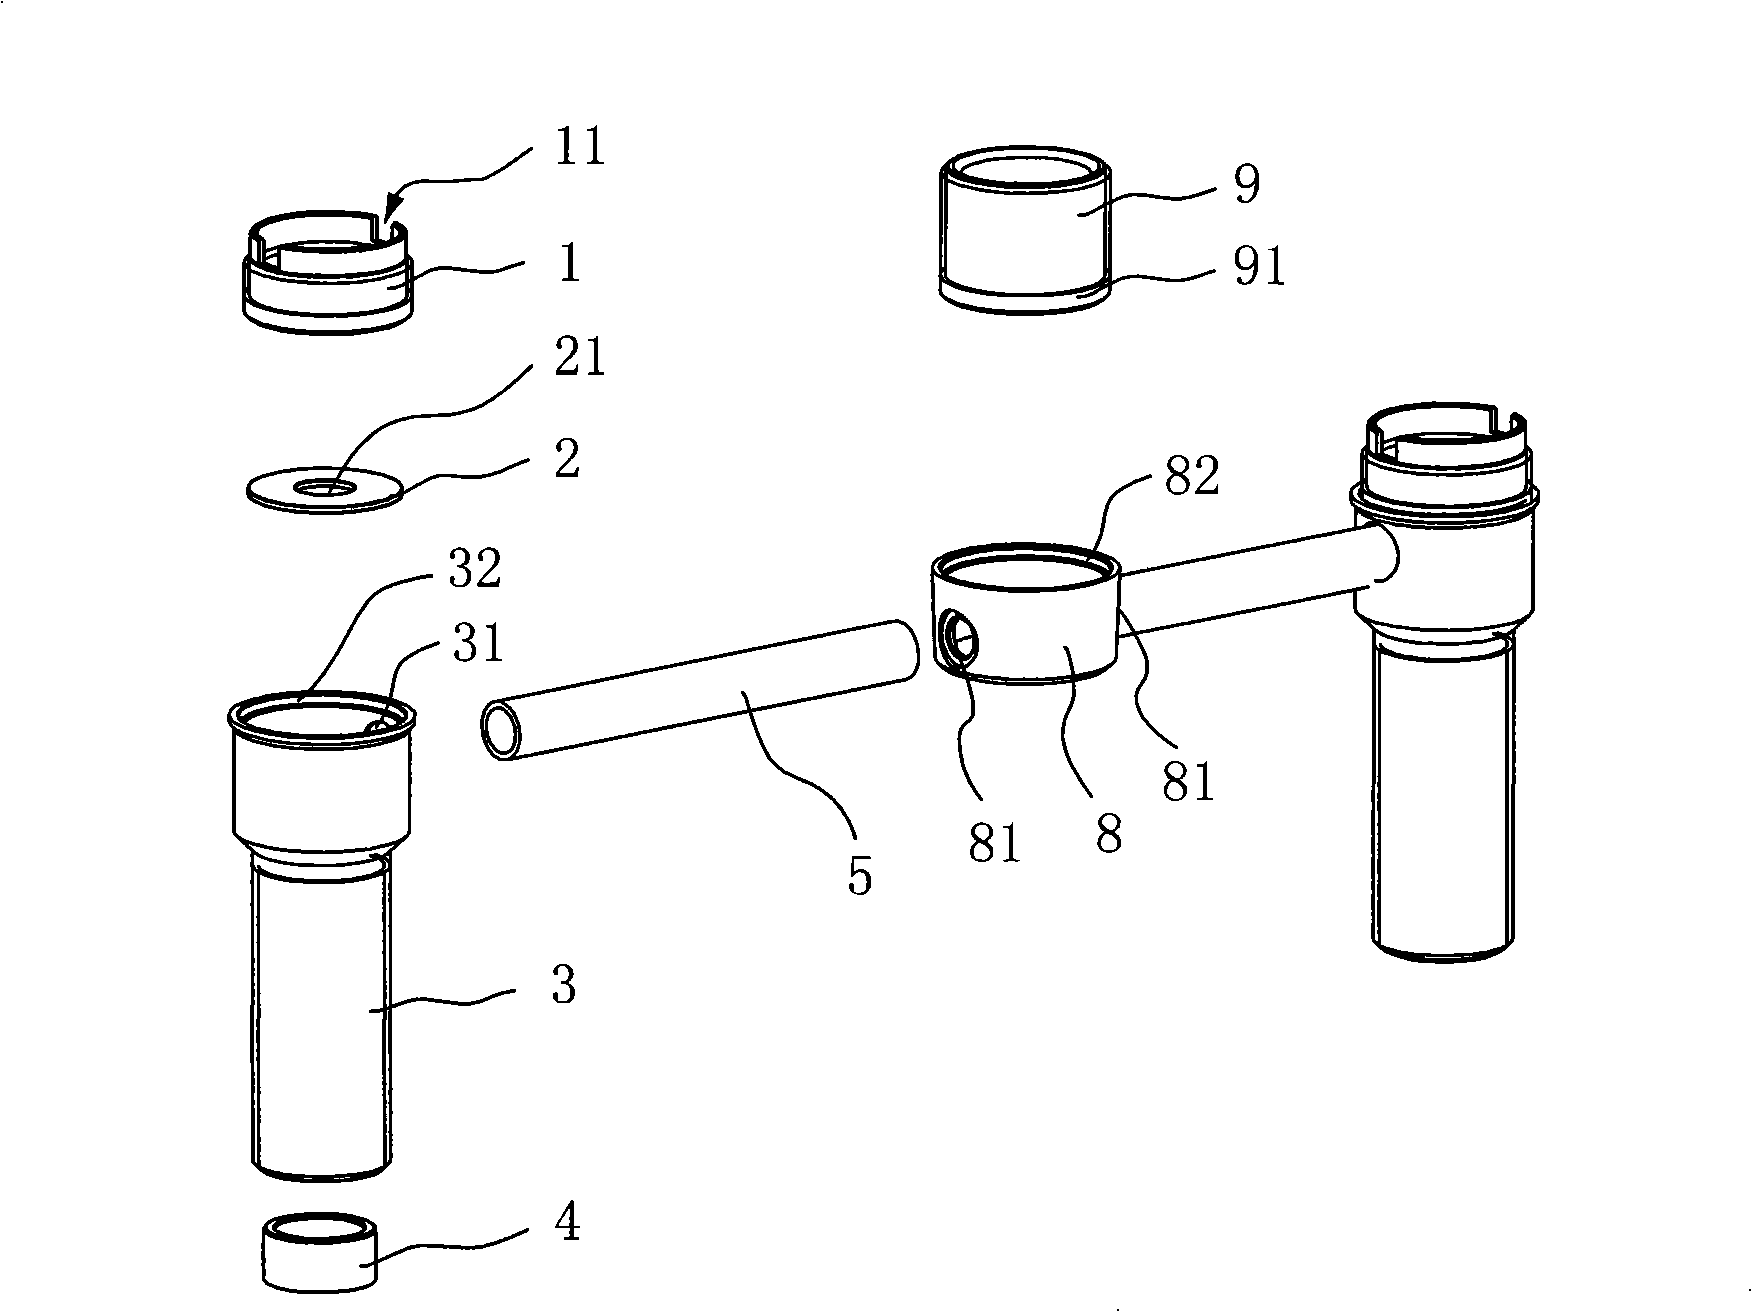 Process for manufacturing tap body